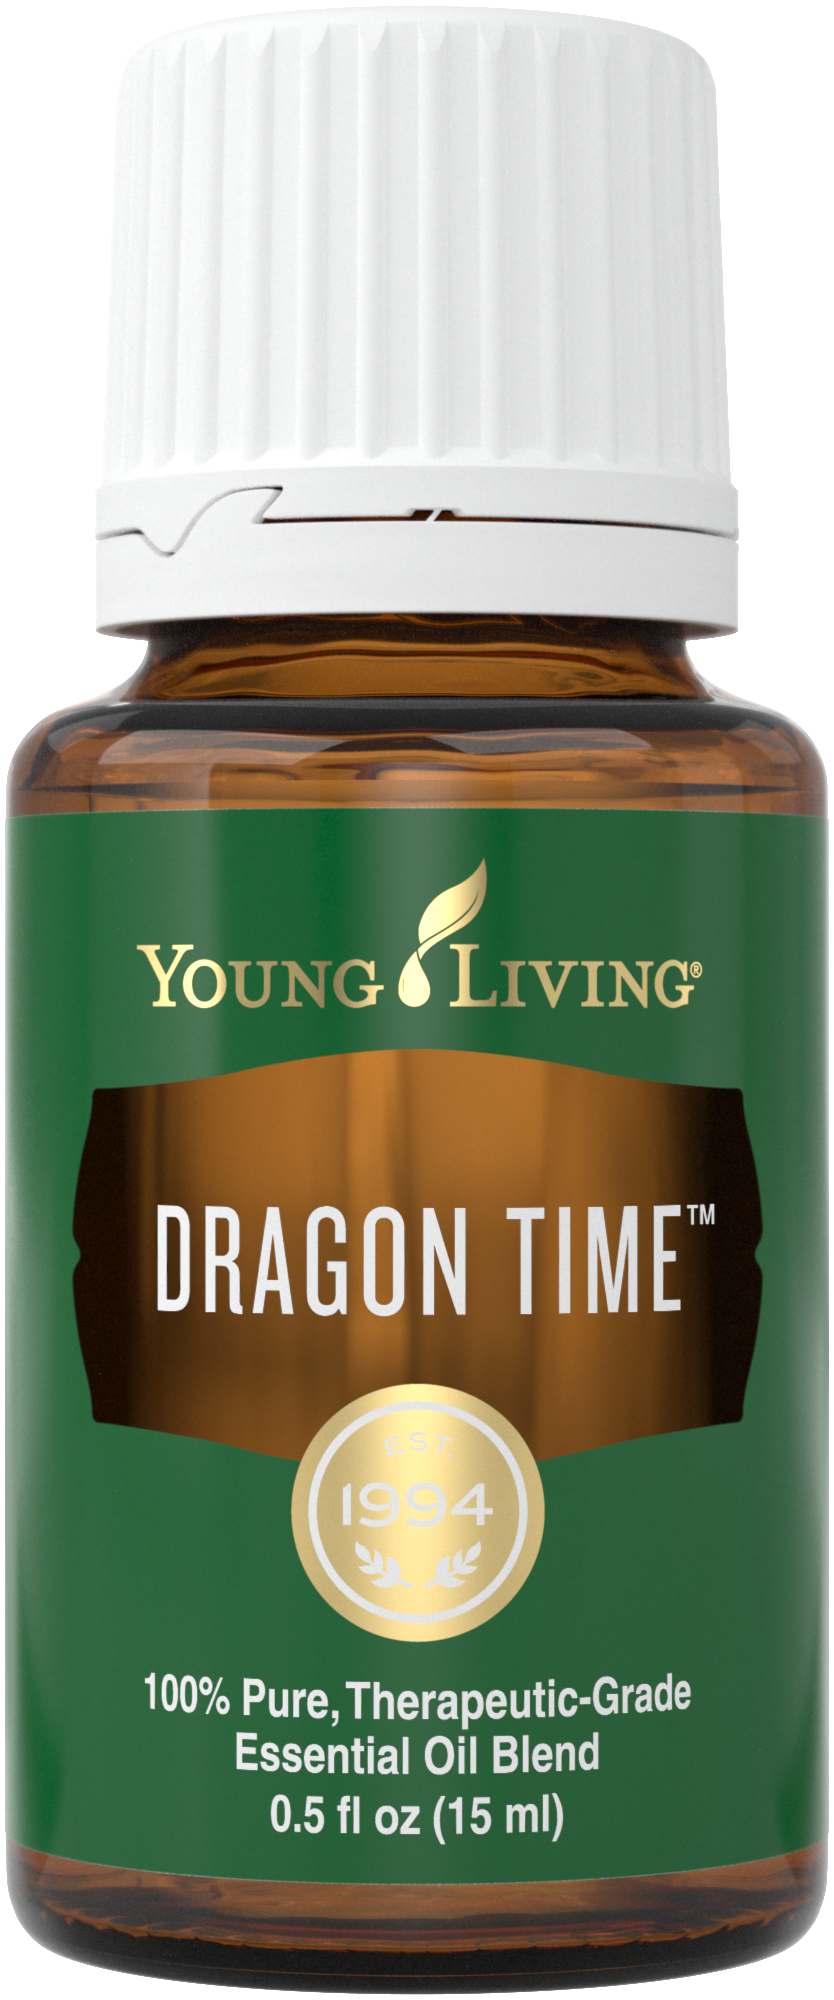 Dragon Time essential oil blend uses | Young Living